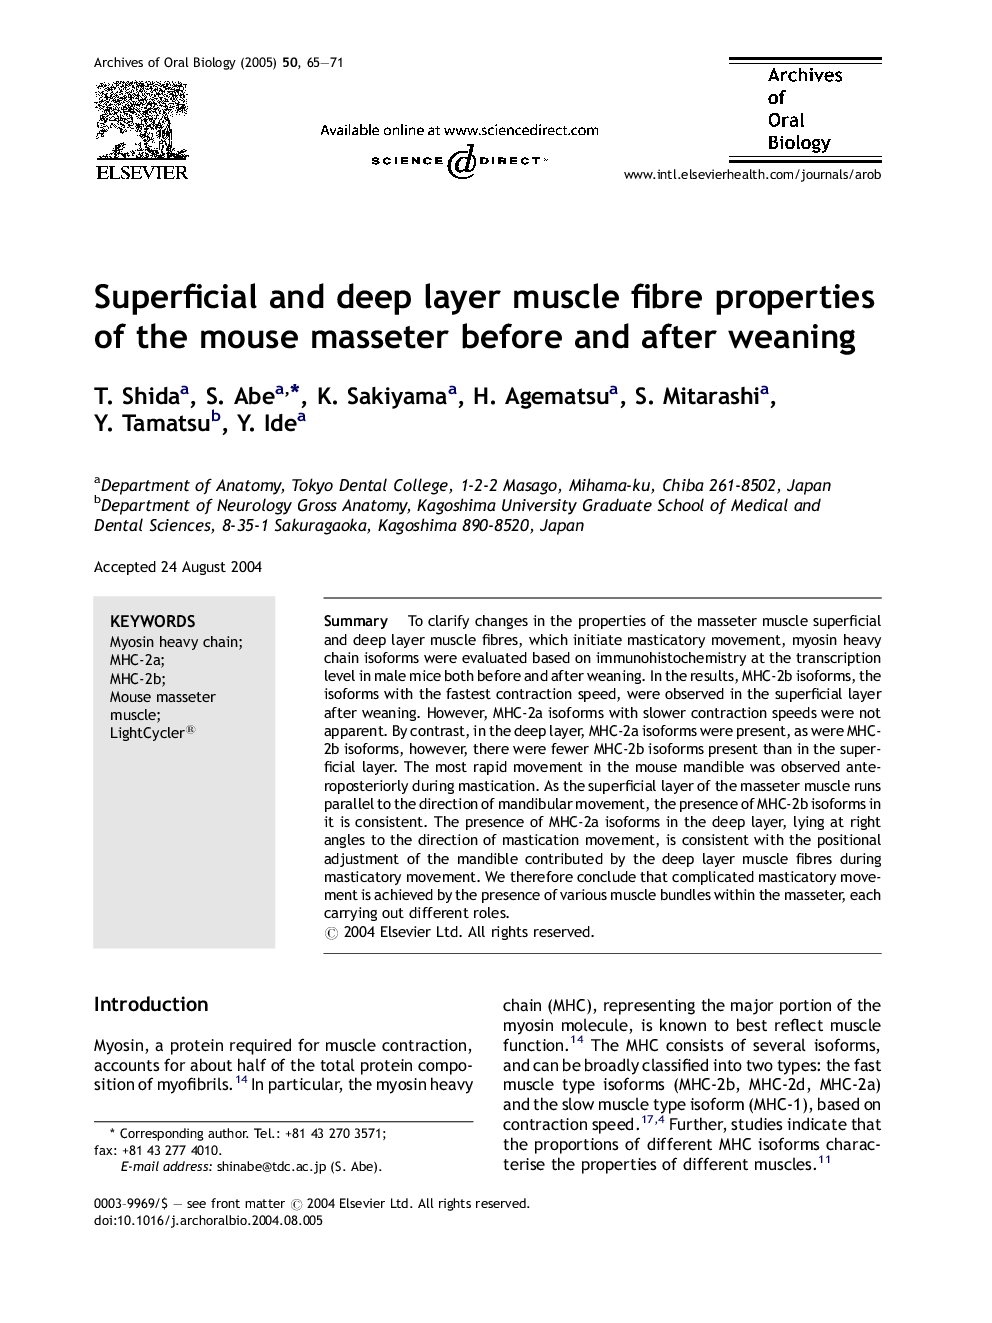 Superficial and deep layer muscle fibre properties of the mouse masseter before and after weaning